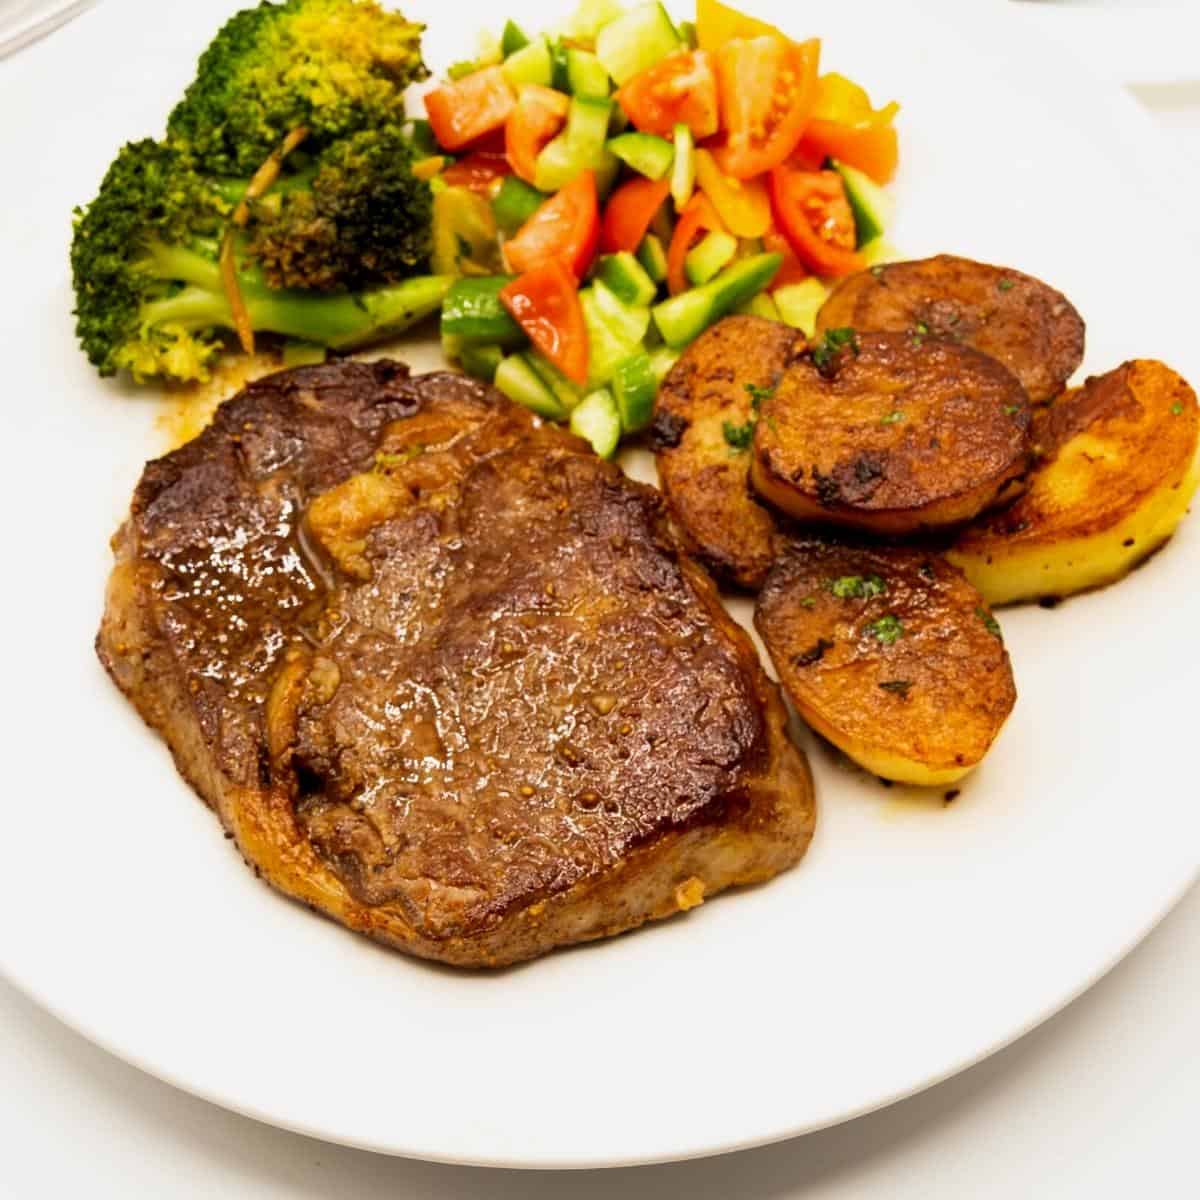 A plate with steak, melting potatoes, and veggies.